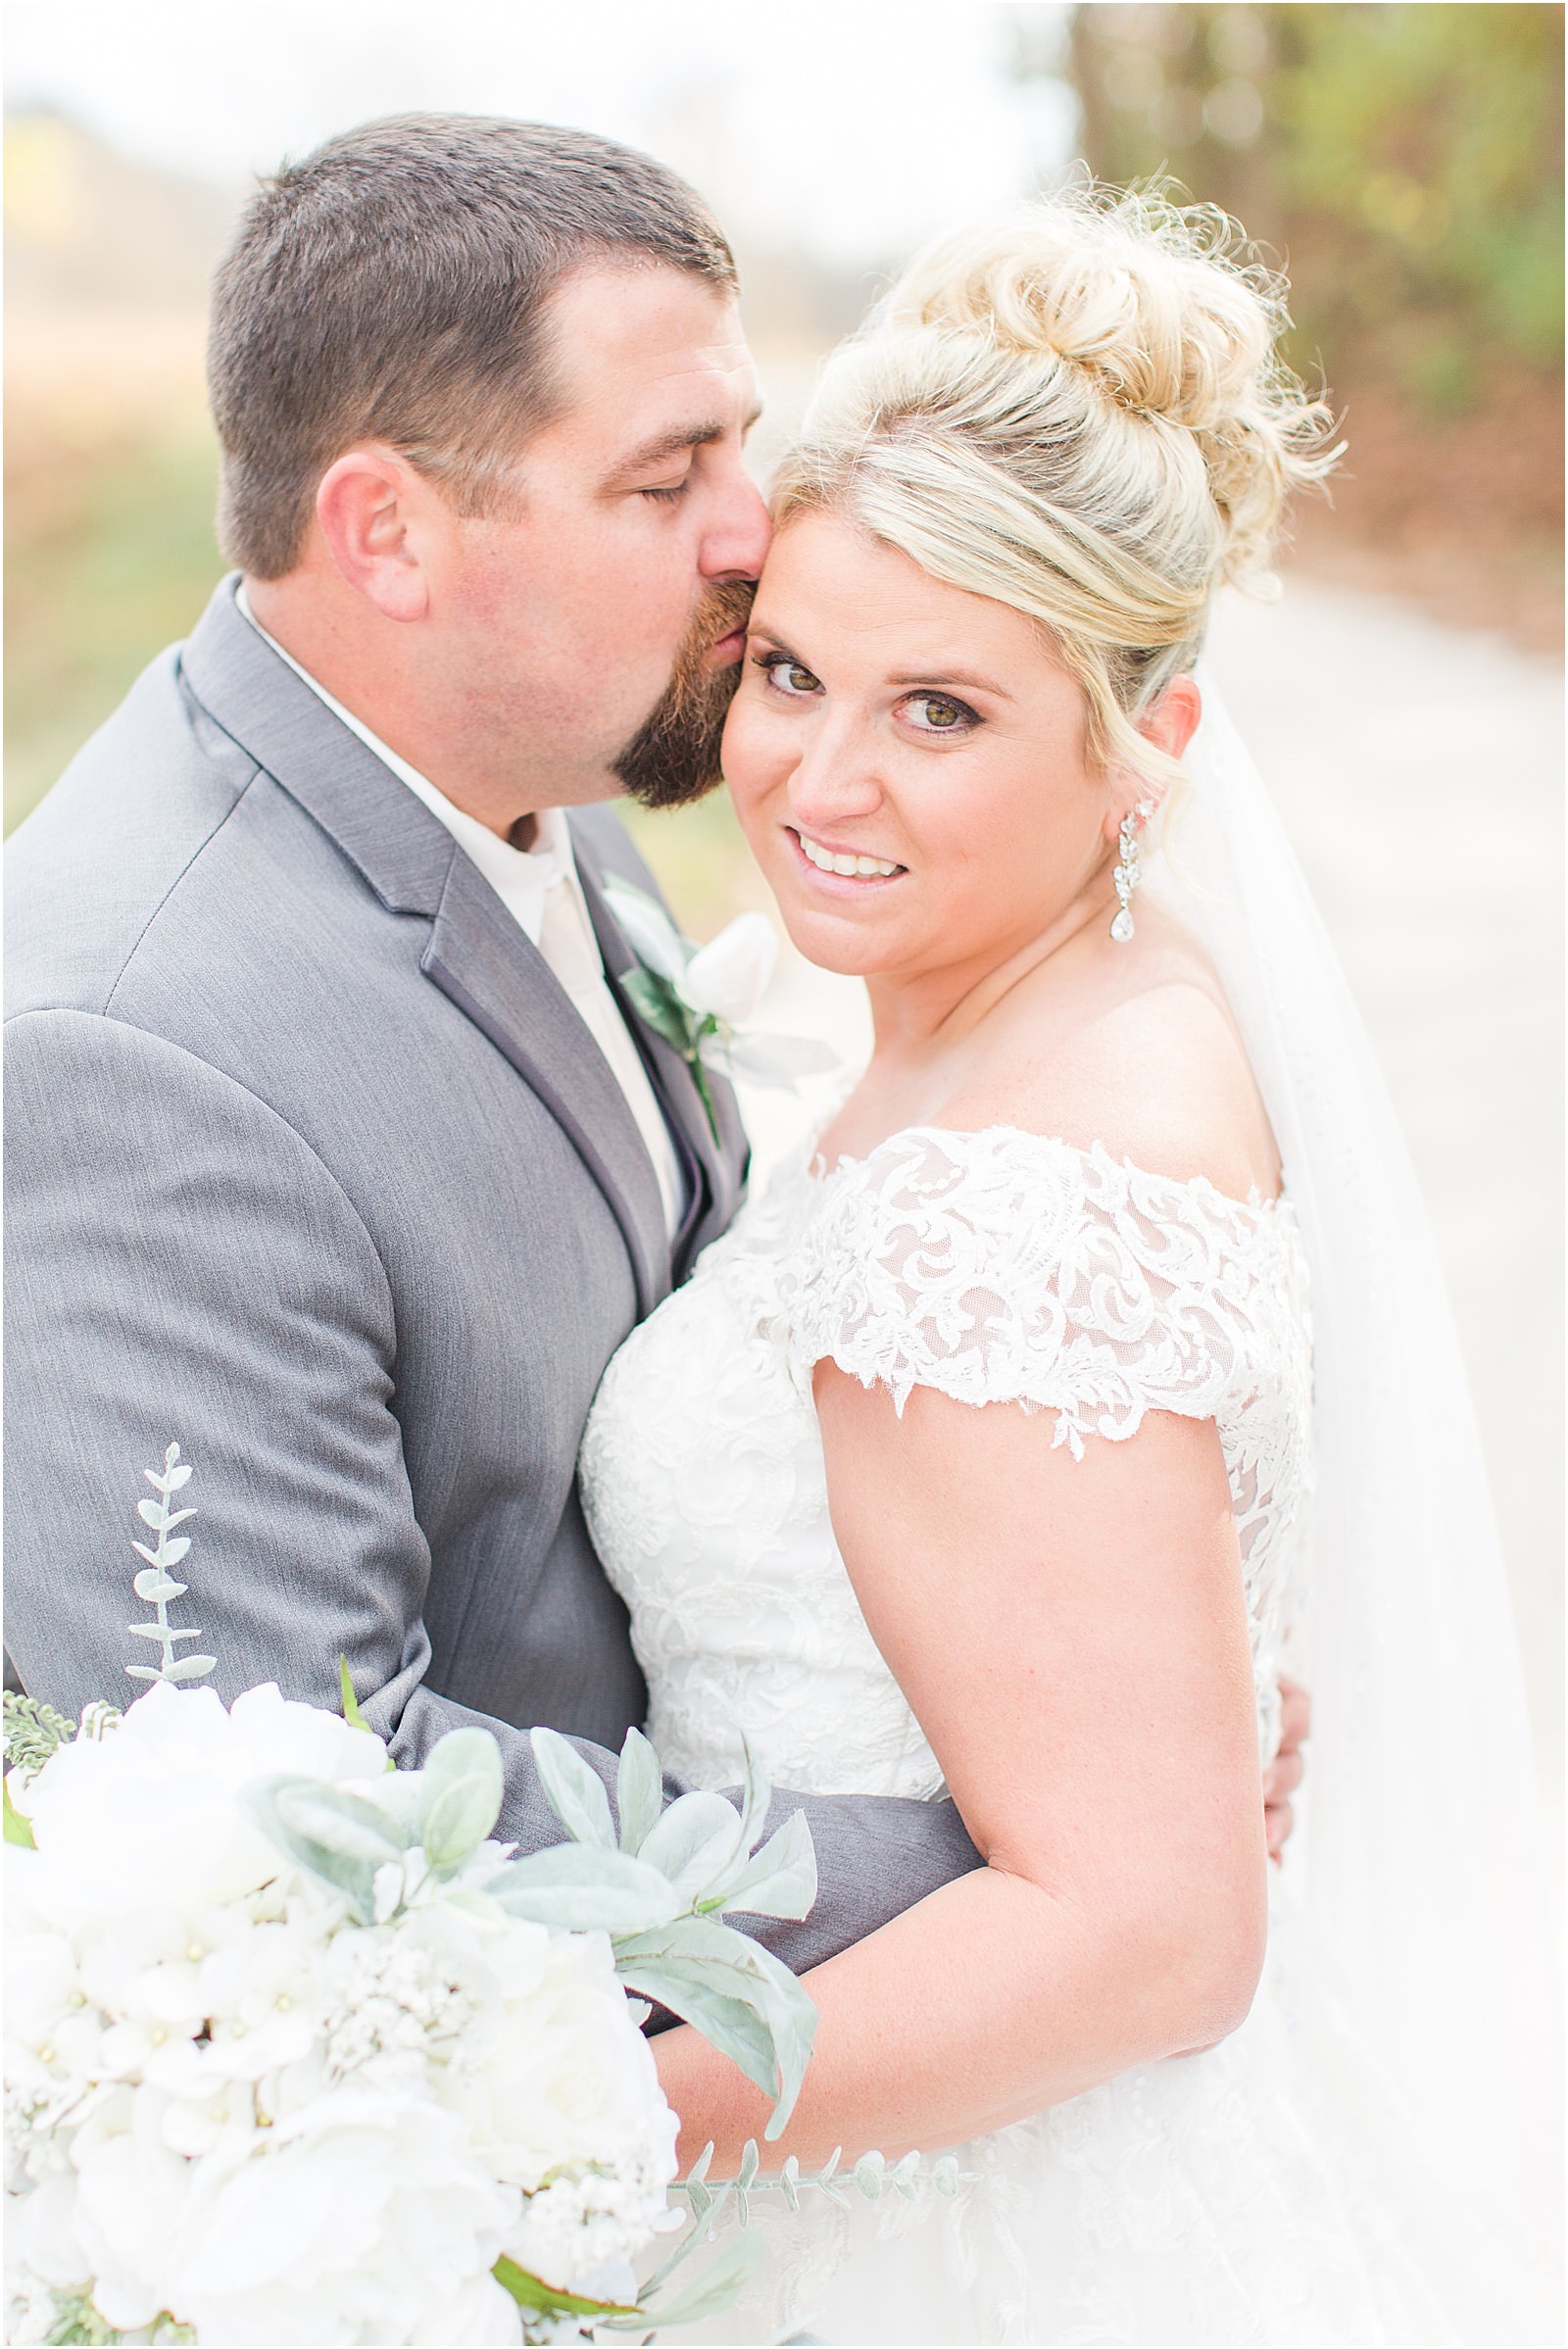 A Navy and Blush Wedding in Tell City Indiana | Brianna and Matt | Bret and Brandie Photography 0127.jpg